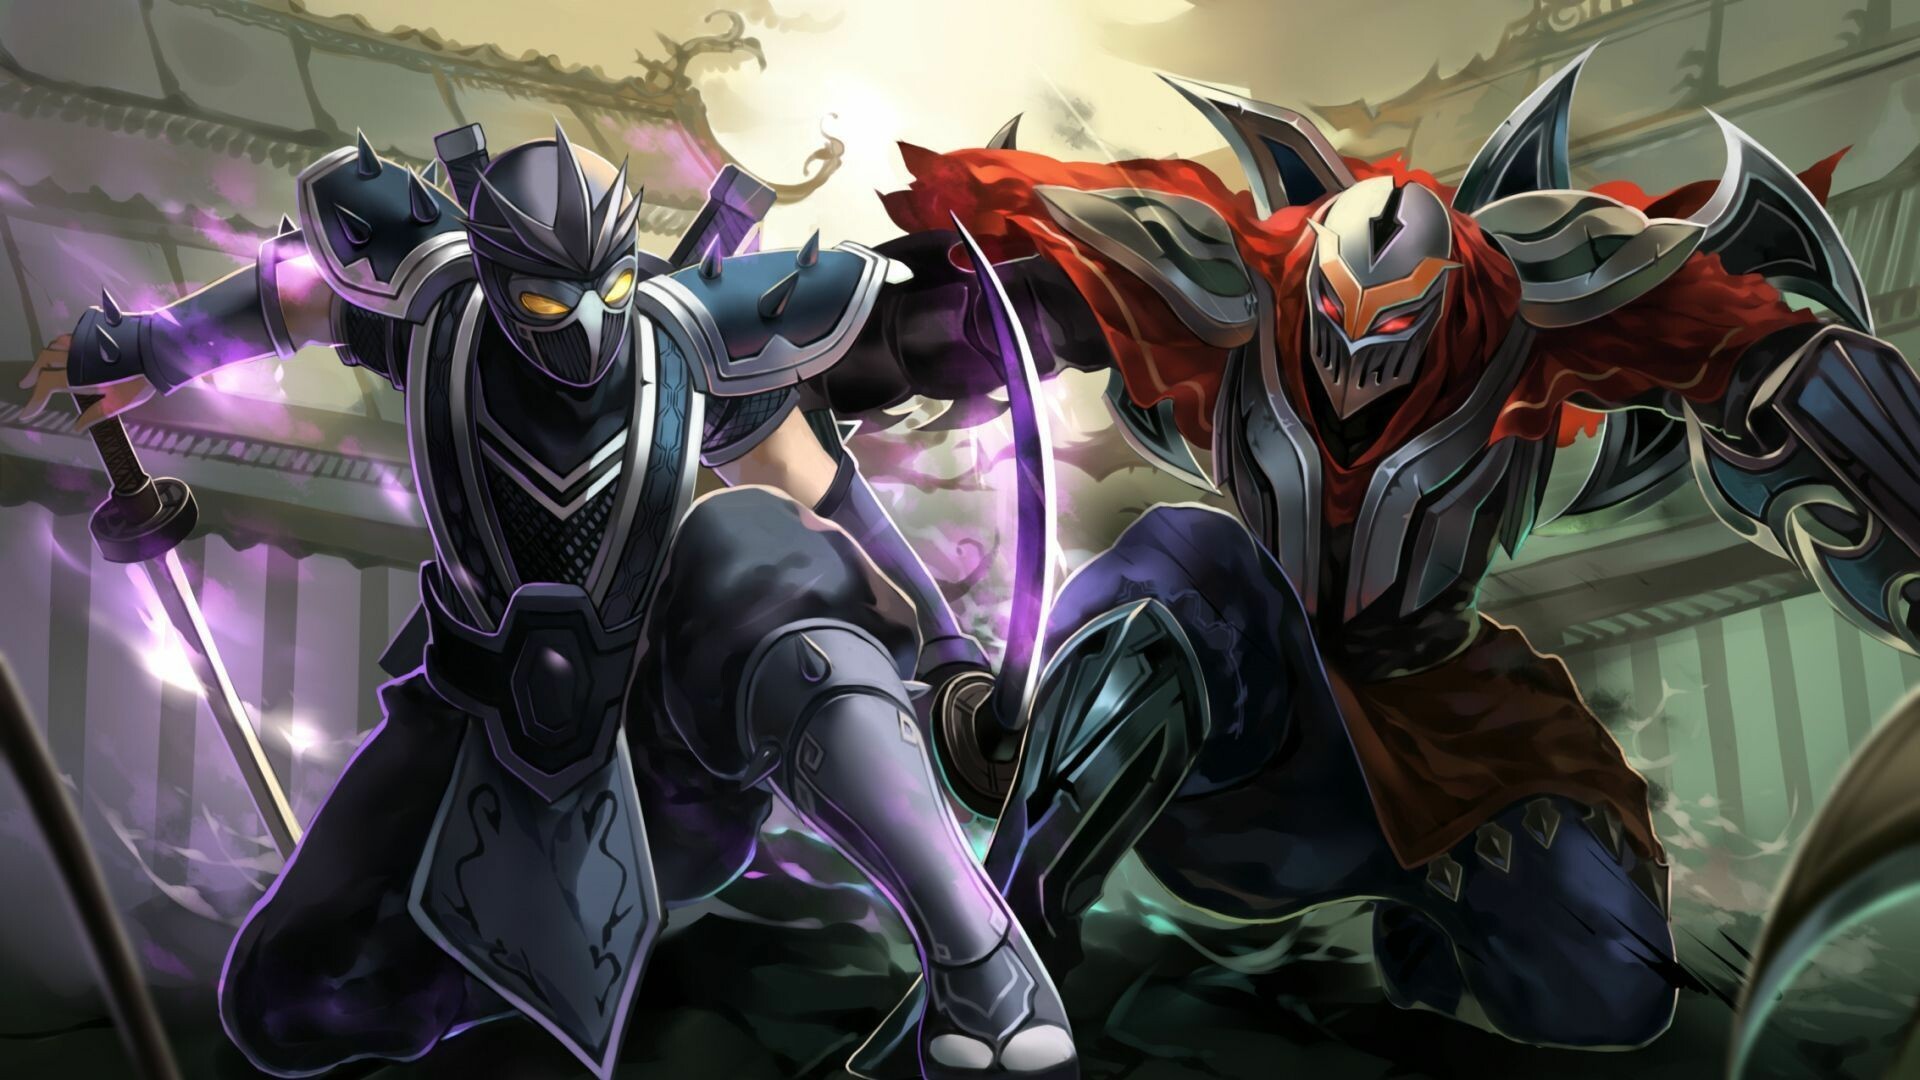 League of Legends: Shen and Zed, Champions, Riot Games title. 1920x1080 Full HD Wallpaper.